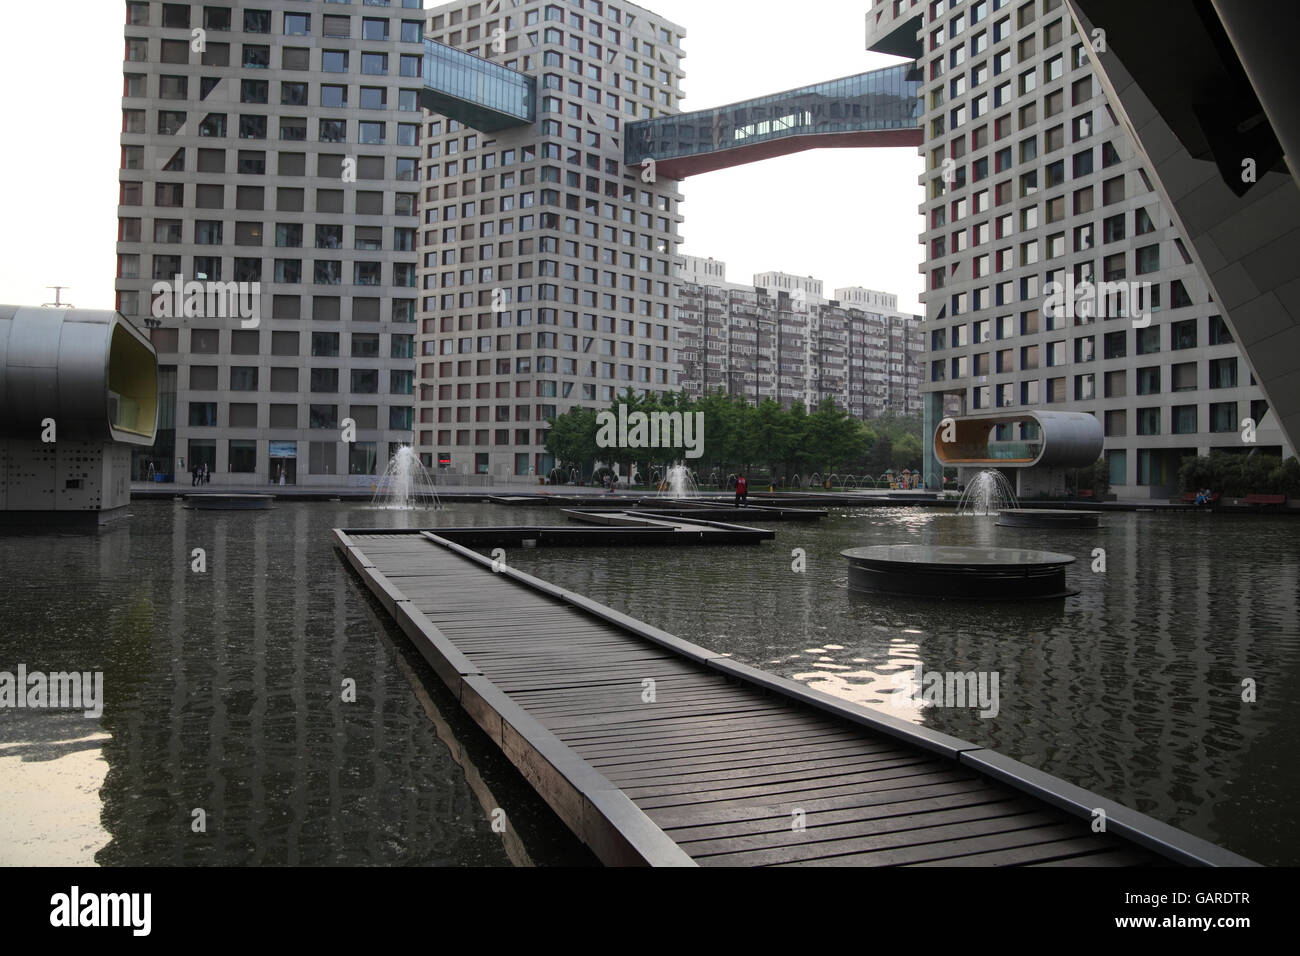 The Moma exclusive residential project designed by famed architect Steven Holl with a lake and covered bridges connecting the houses. Beijing, China. Stock Photo